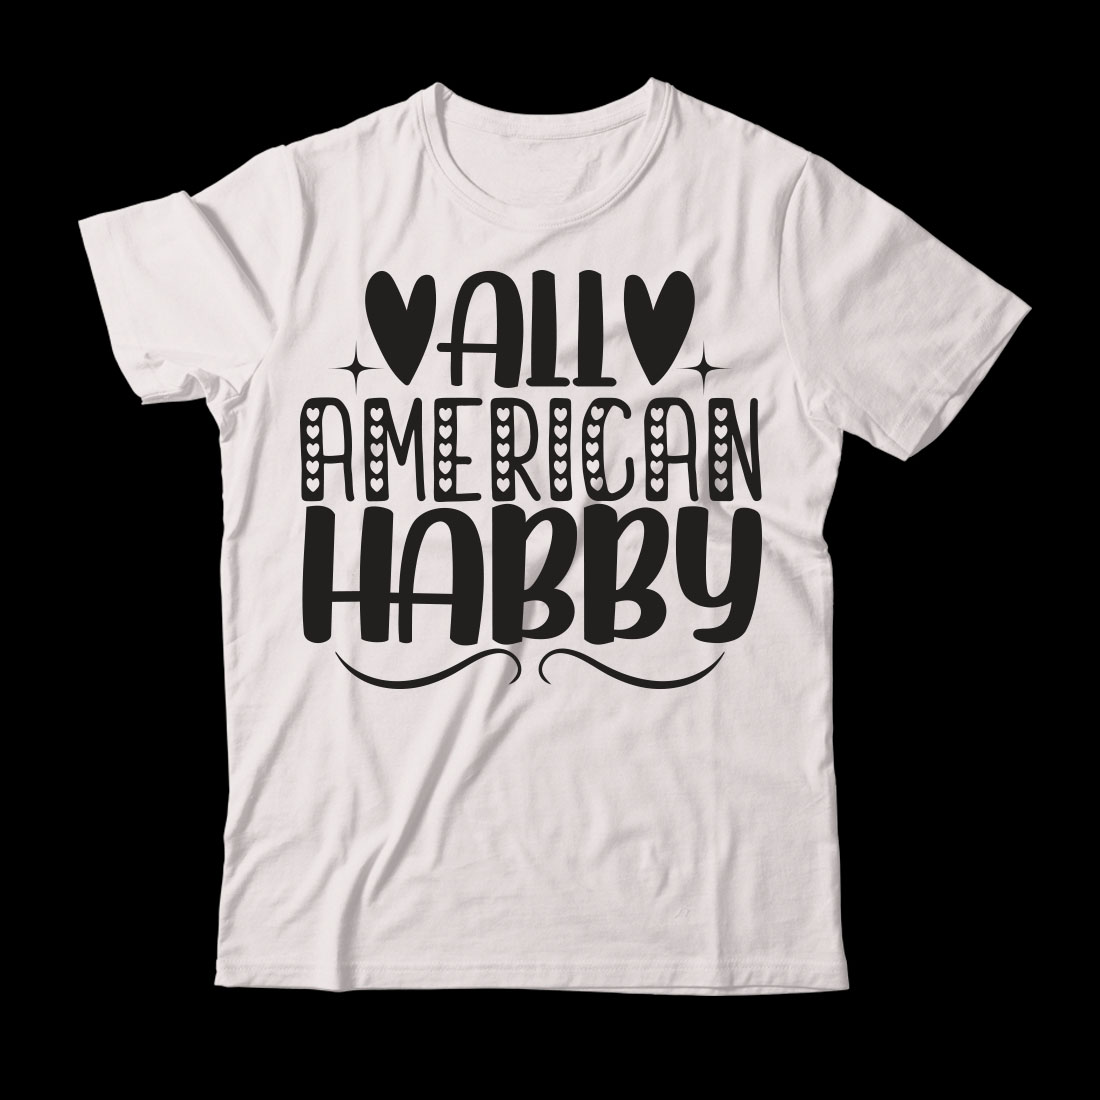 White t - shirt that says ally american happy.